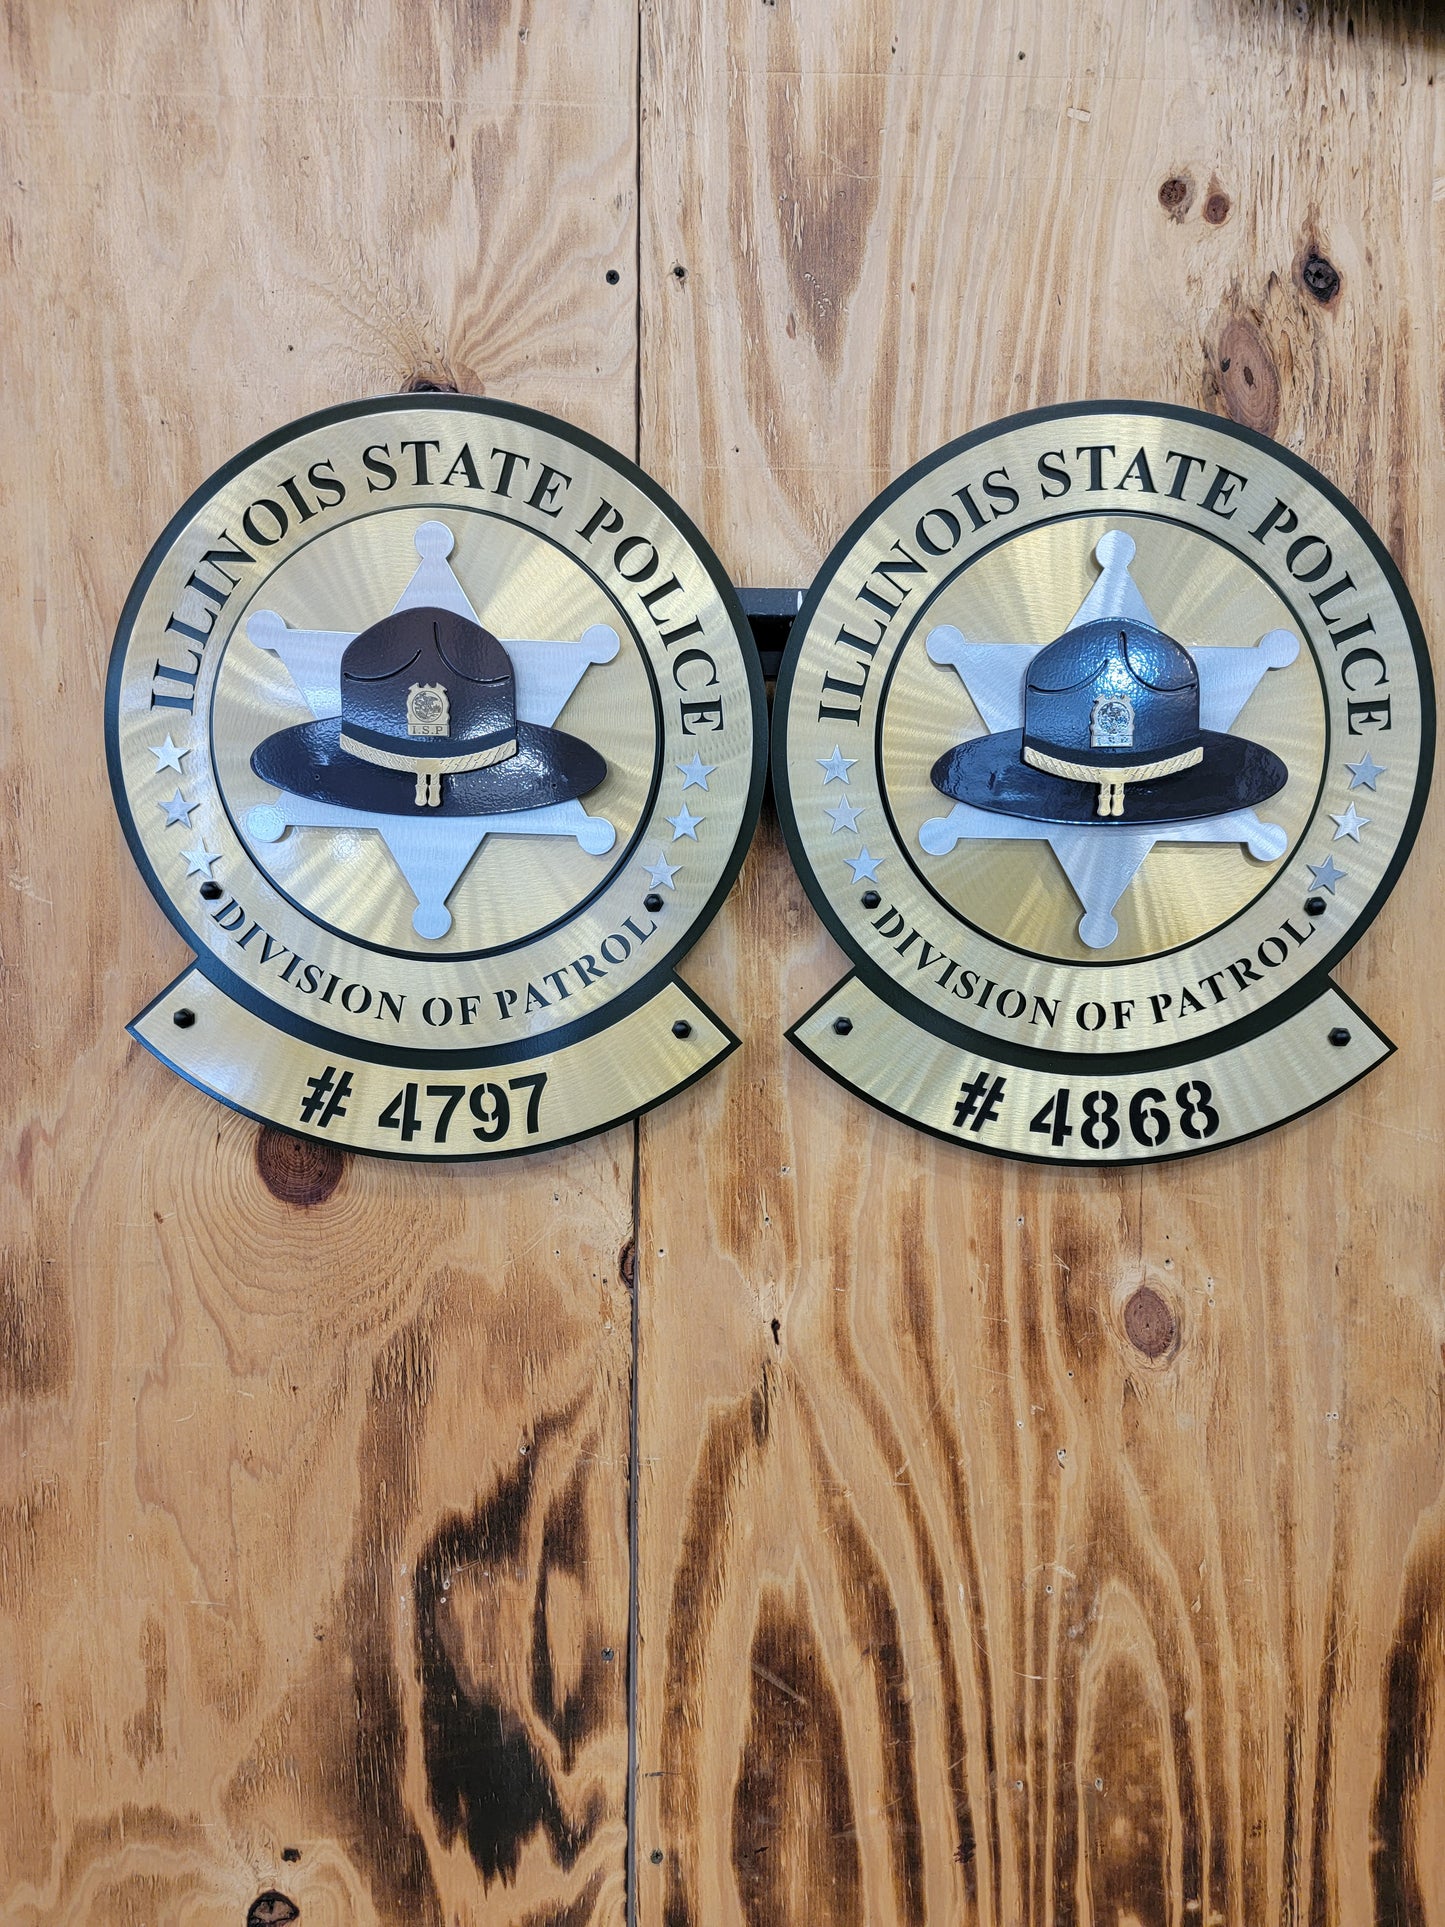 Illinois State Police Division Of Patrol